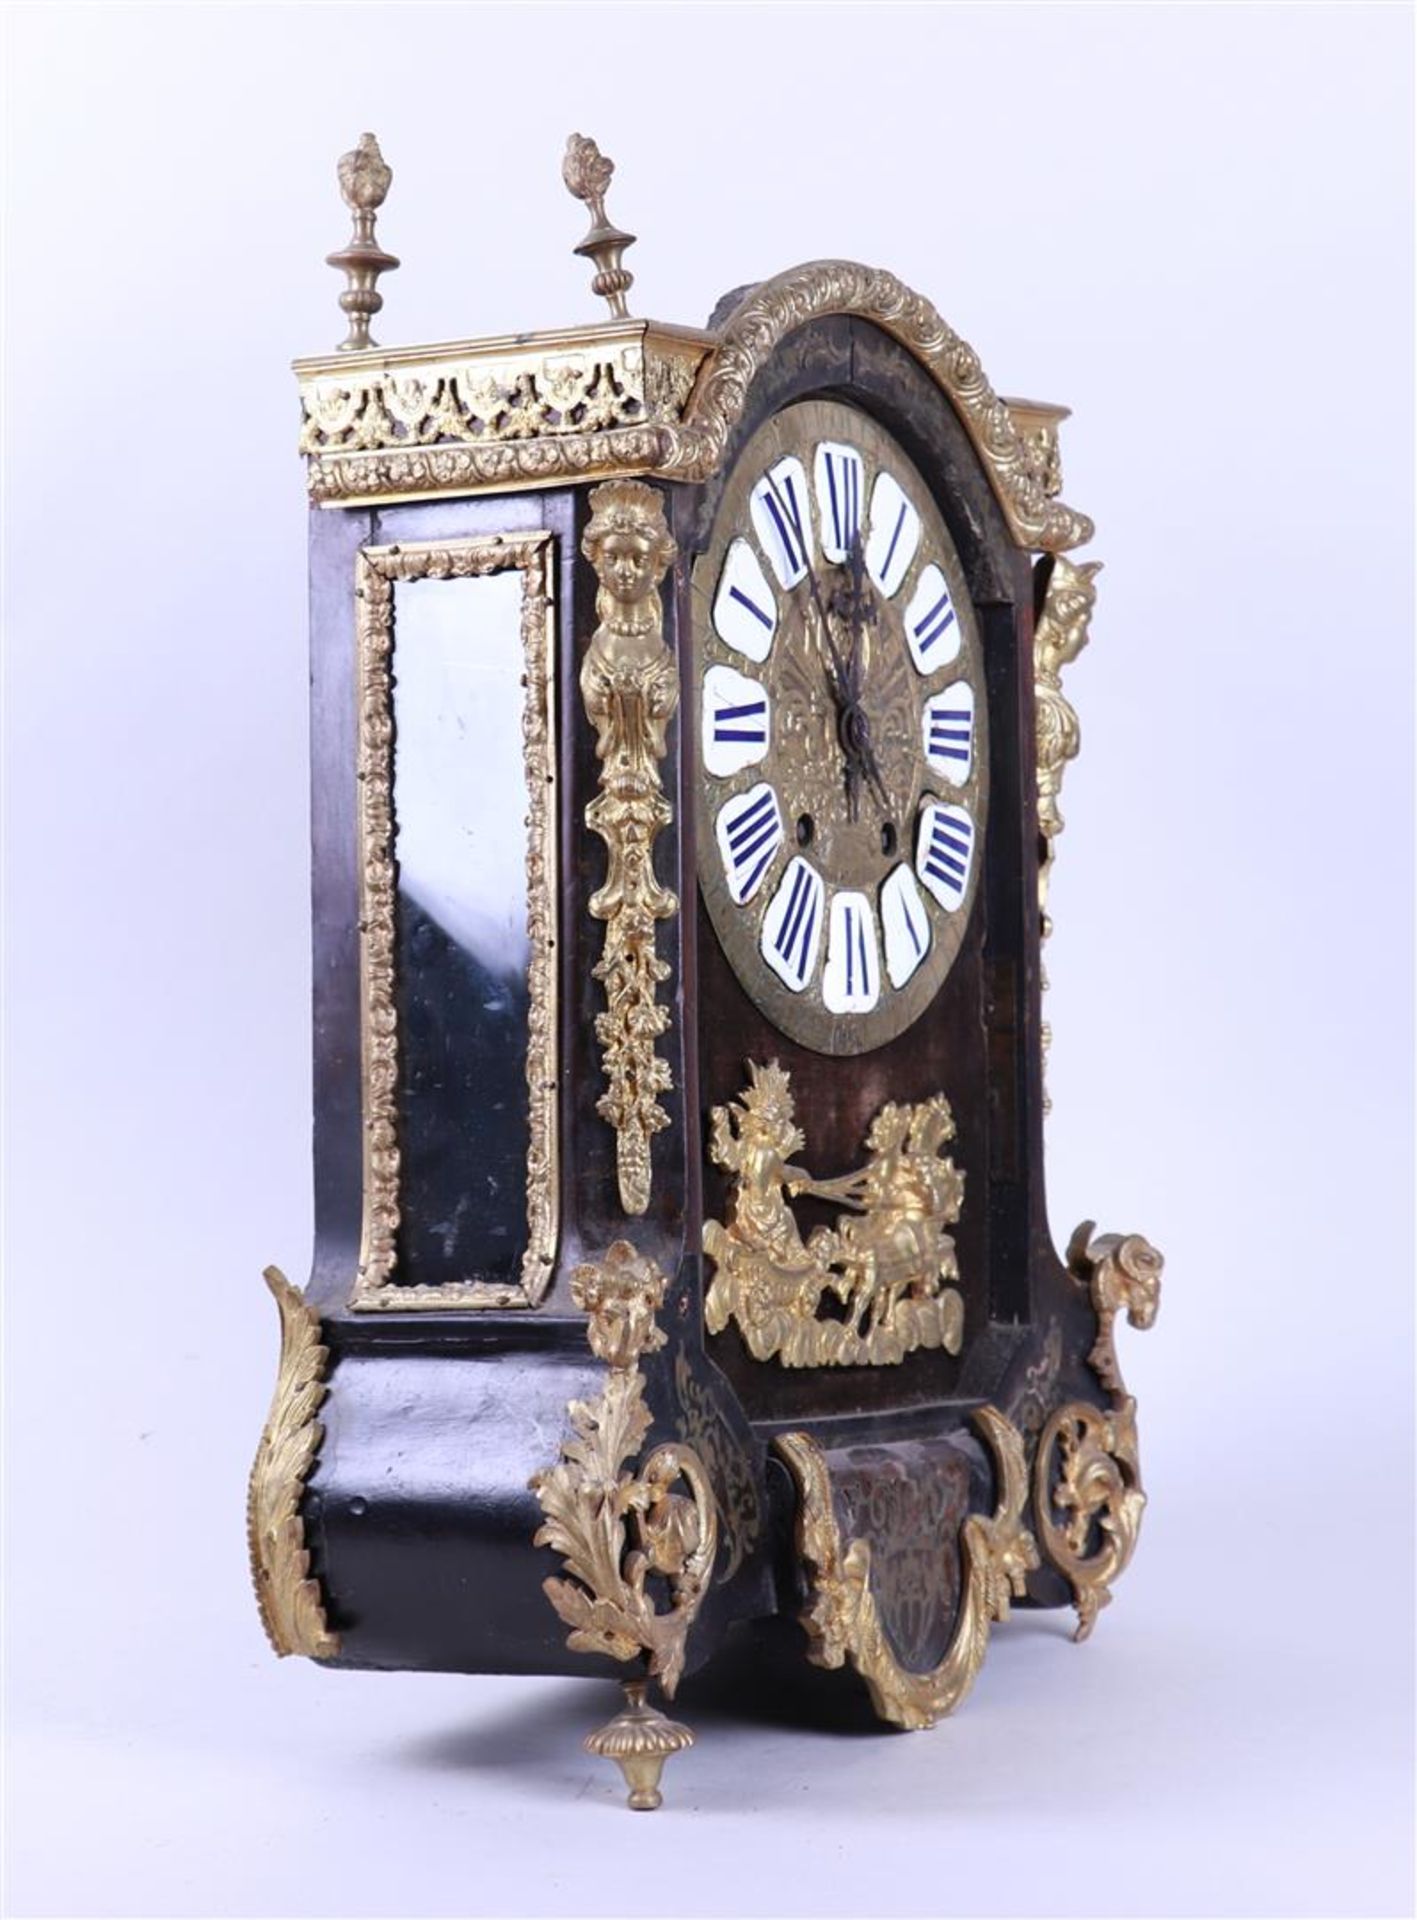 19th Century Table Clock with Copper Frames (Restoration Object, Parts Shortage) - Image 5 of 5